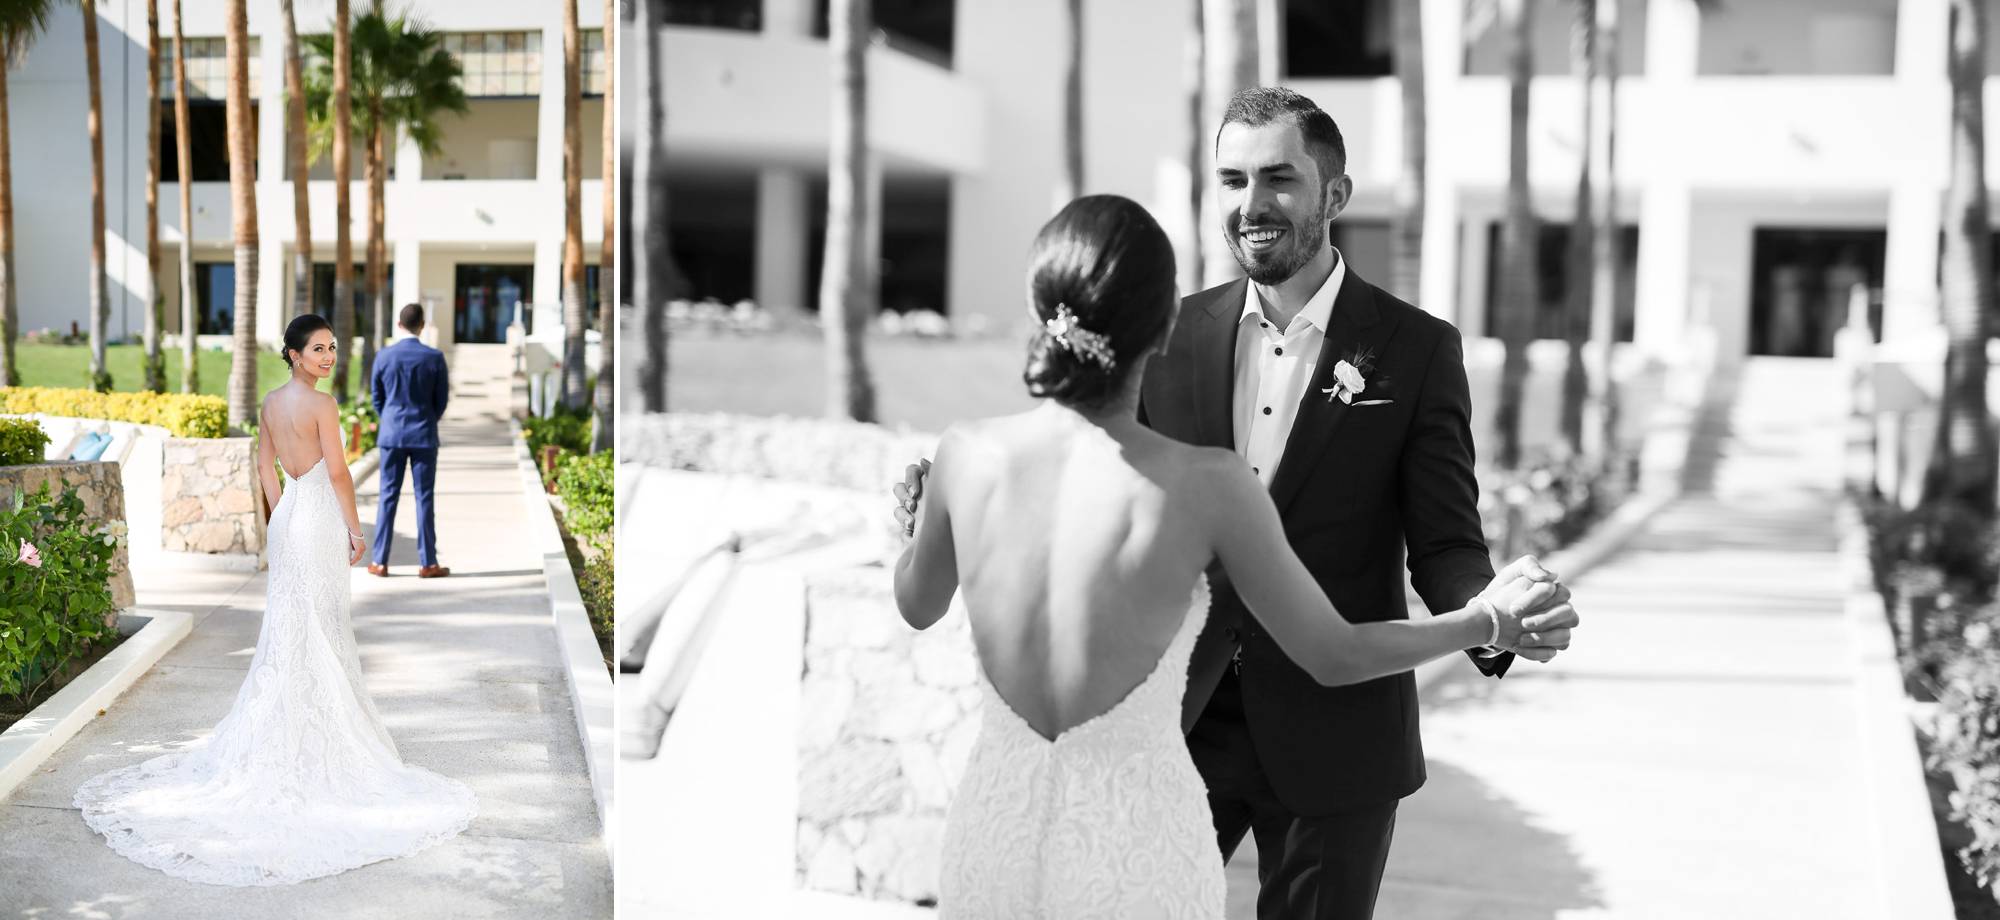 Bride and Groom first look reveal on resort property